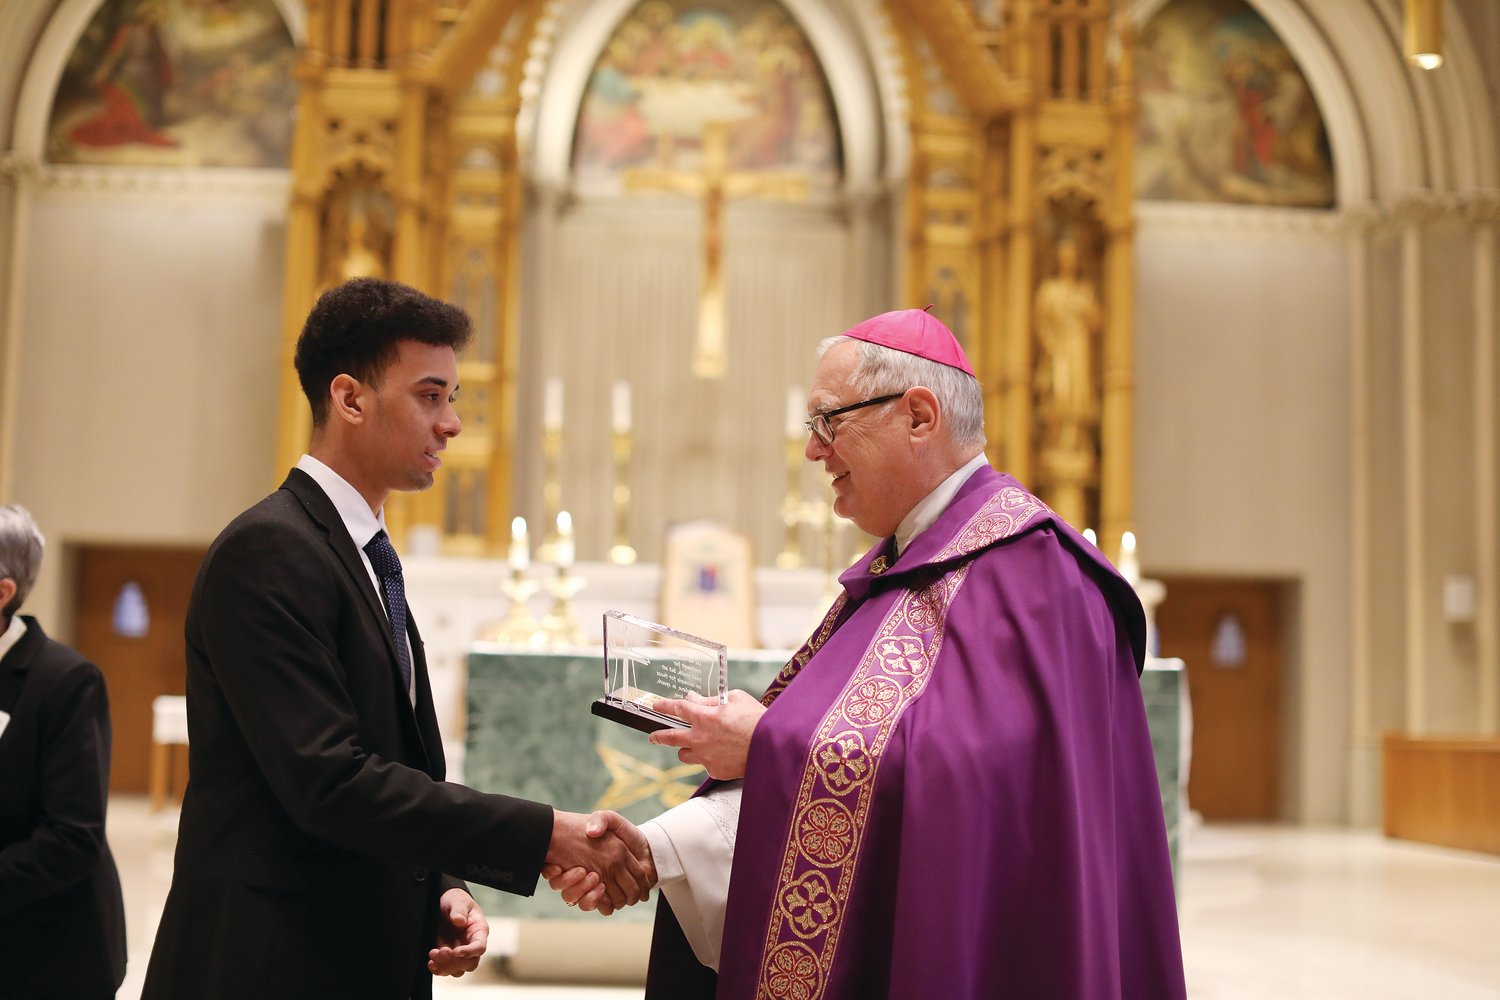 Many were honored at this year’s diocesan Catholic Youth Ministry and Scout Awards, held at the Cathedral of SS. Peter and Paul on Sunday, March 13